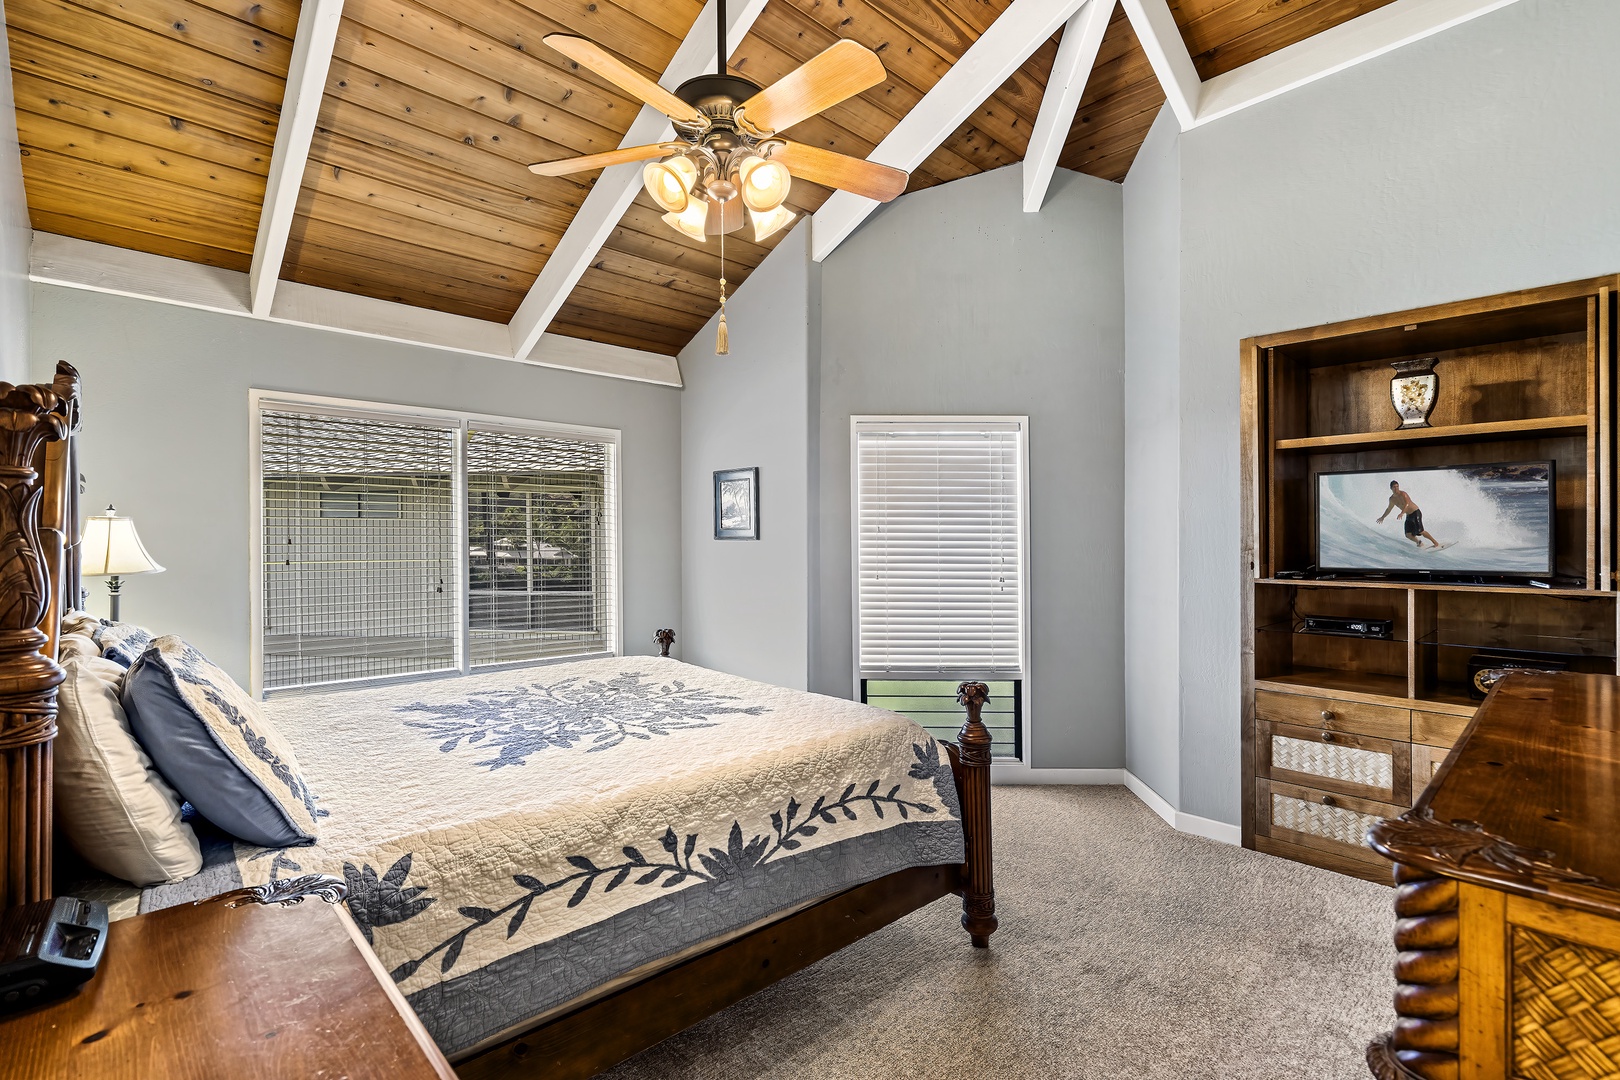 Kailua Kona Vacation Rentals, Kanaloa at Kona 3304 - Vaulted ceiling can be found in the Primary bedroom as well!